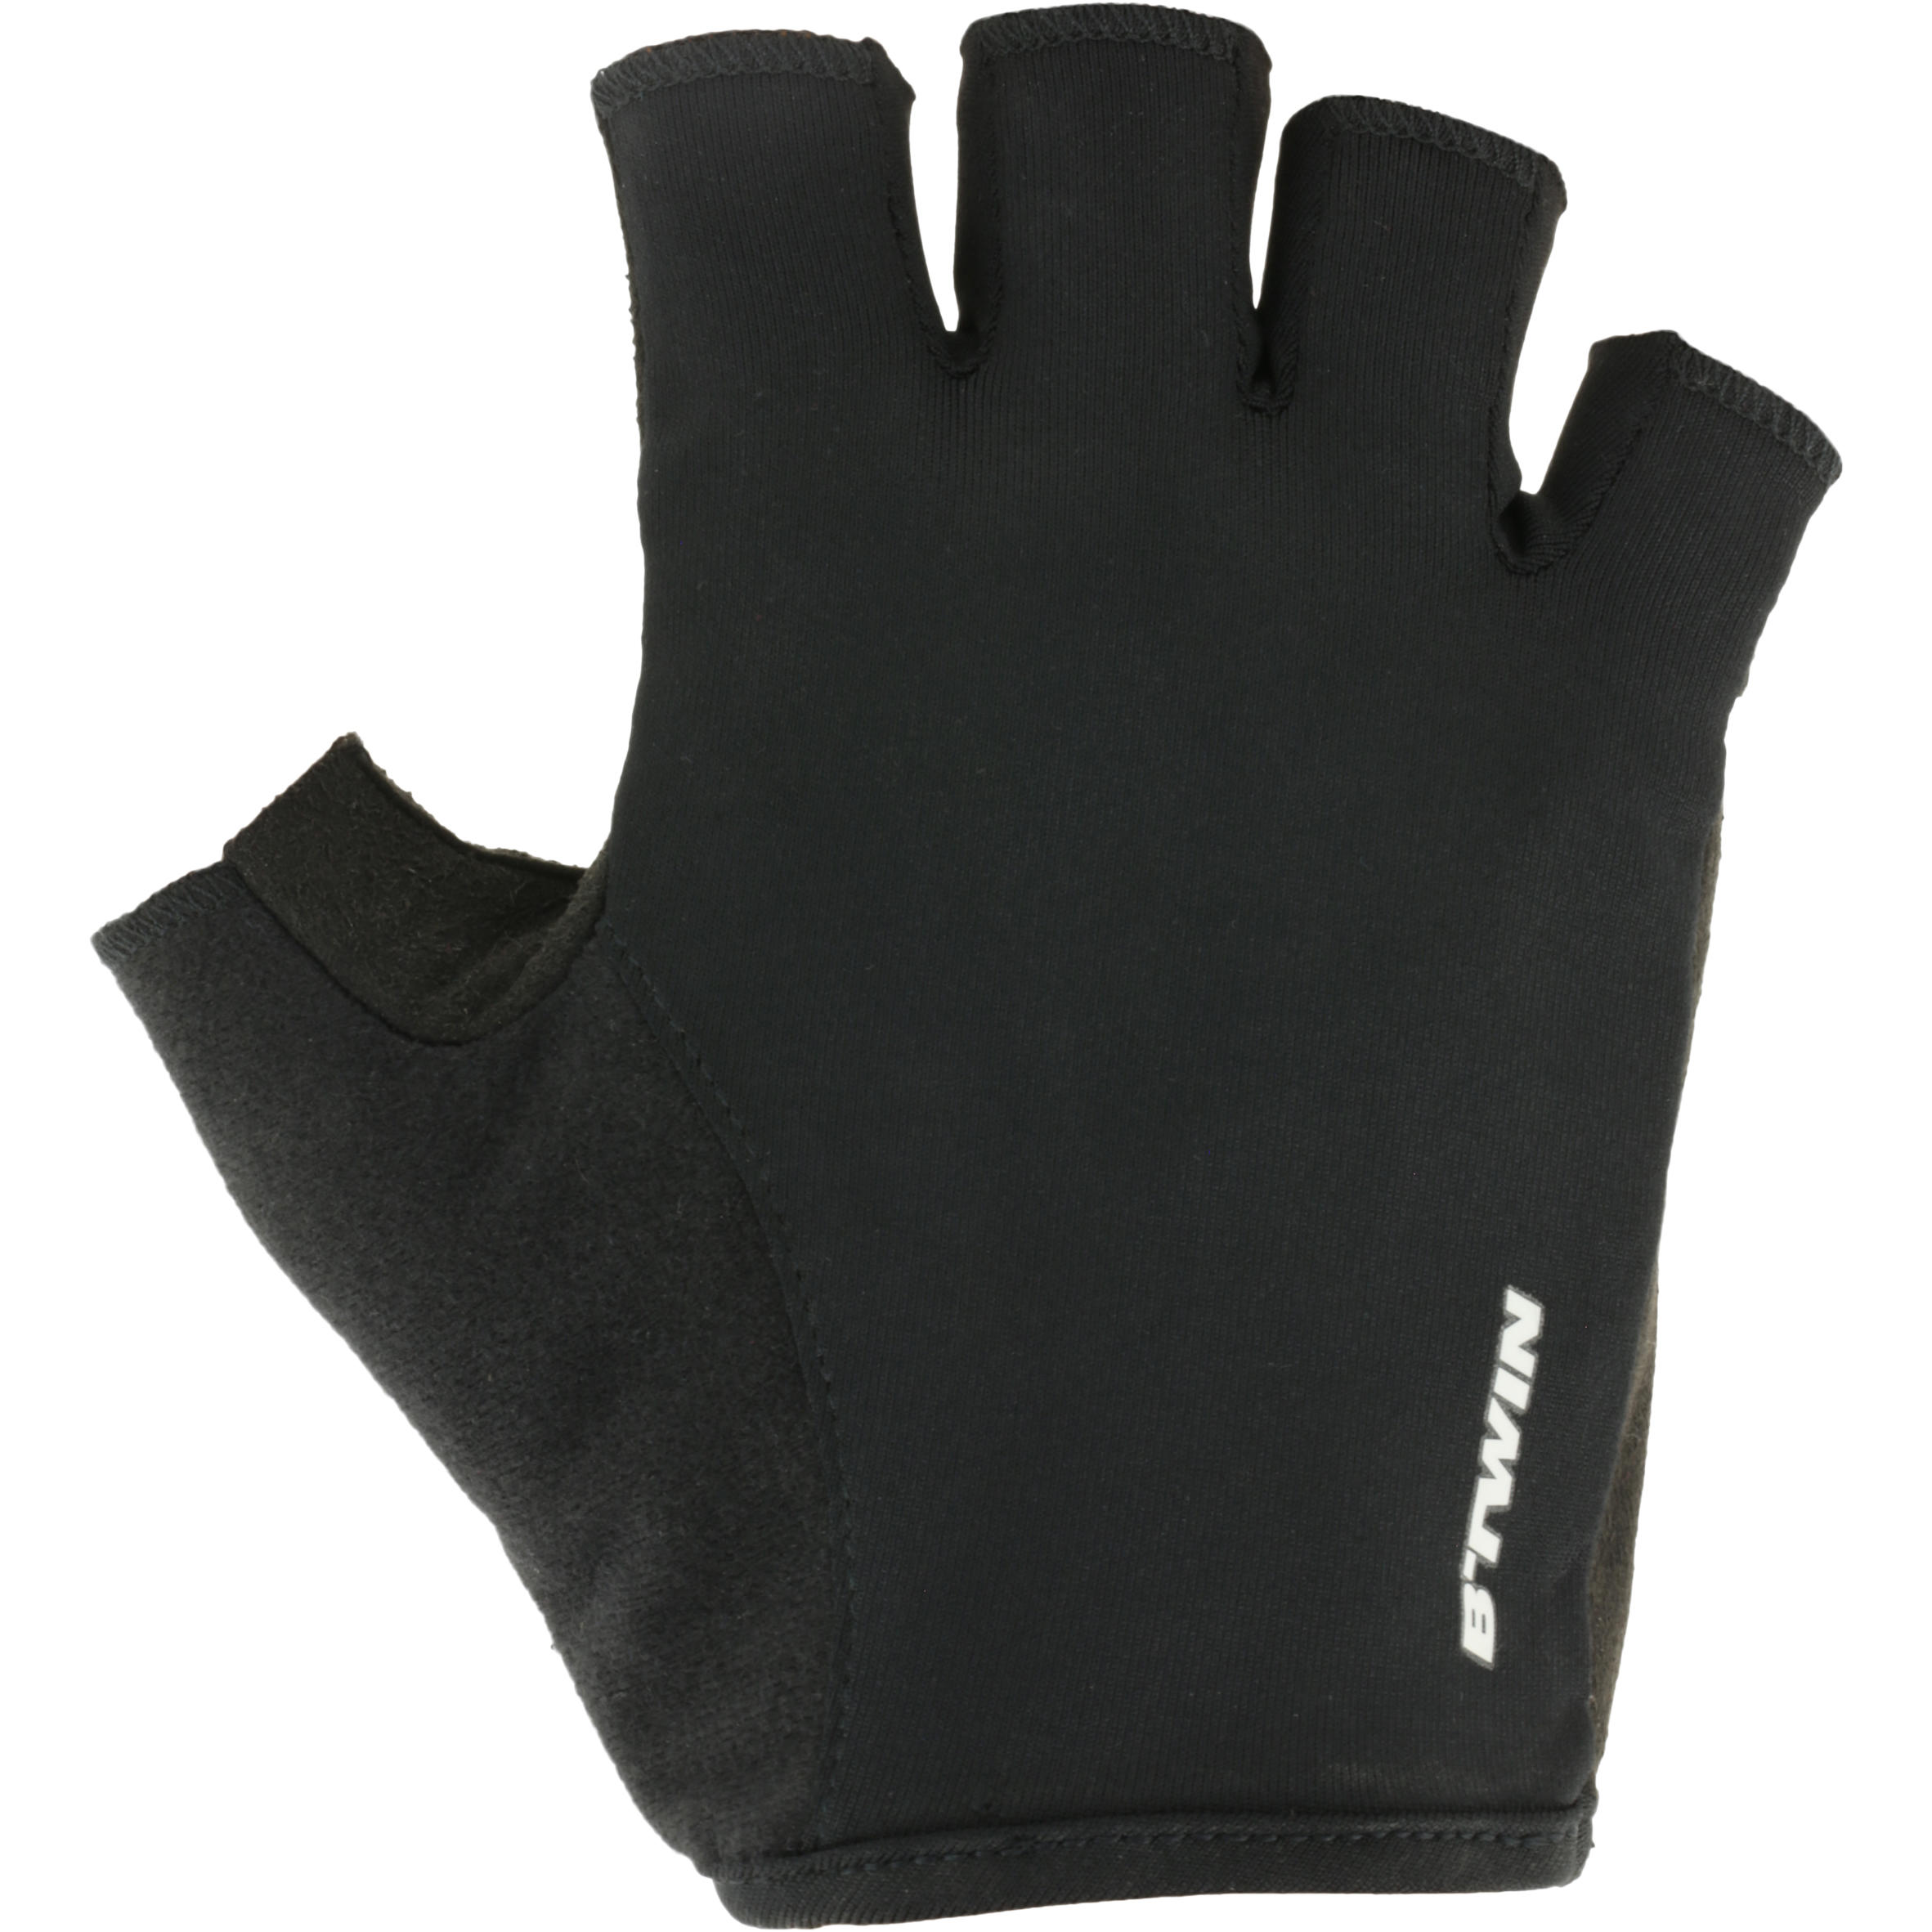 Buy Cycling Gloves Online In India|Bike 